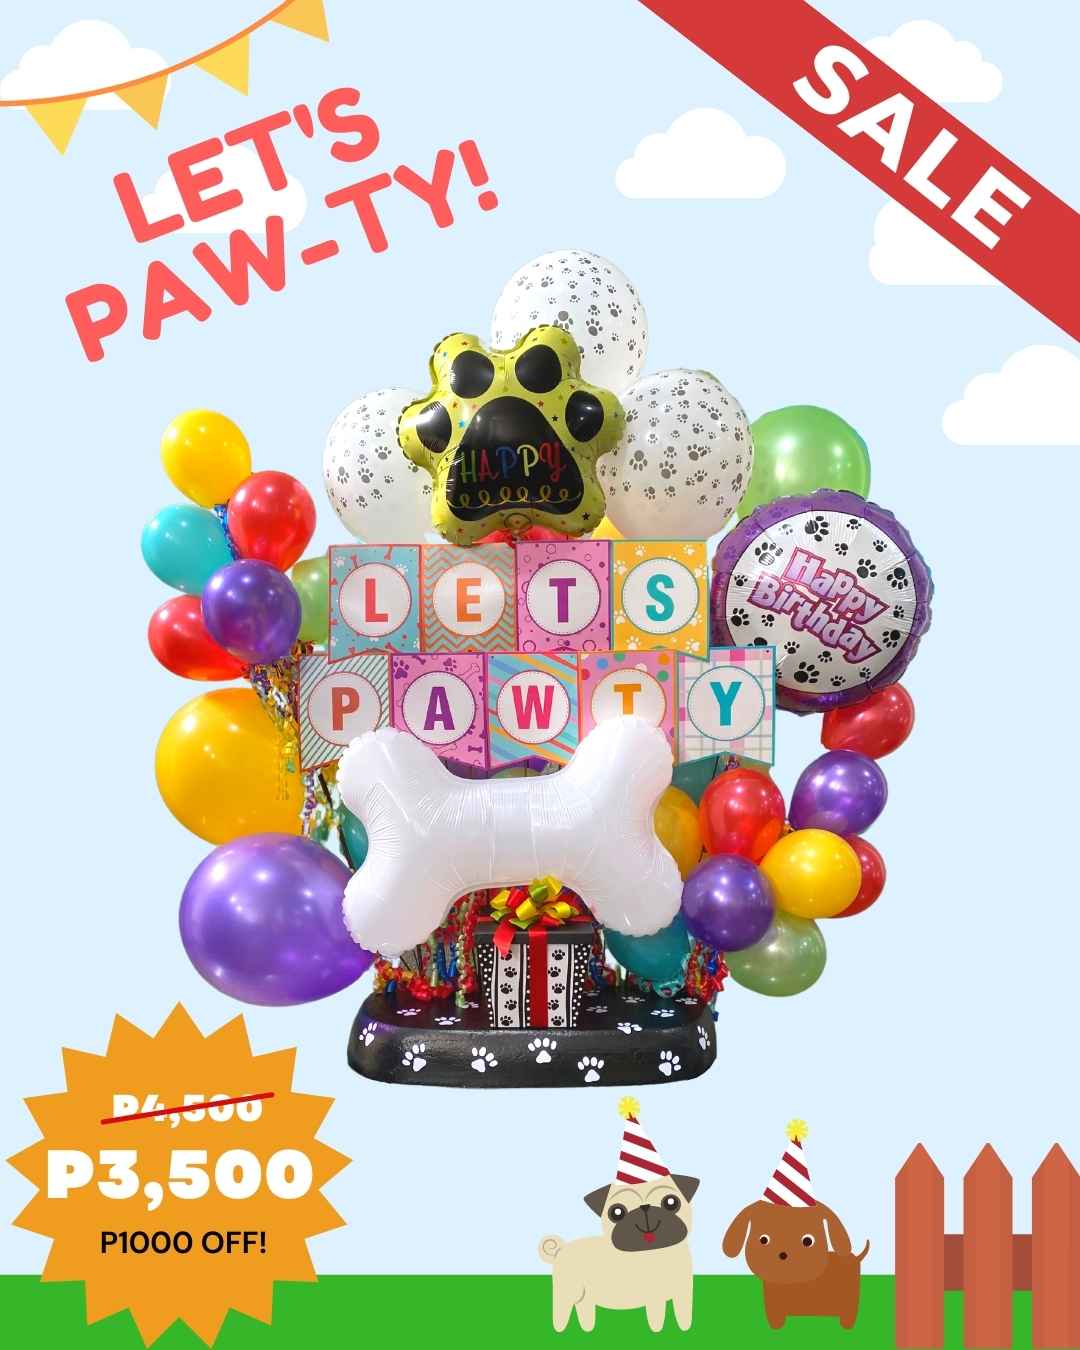 Let\'s Pawty! 🐾